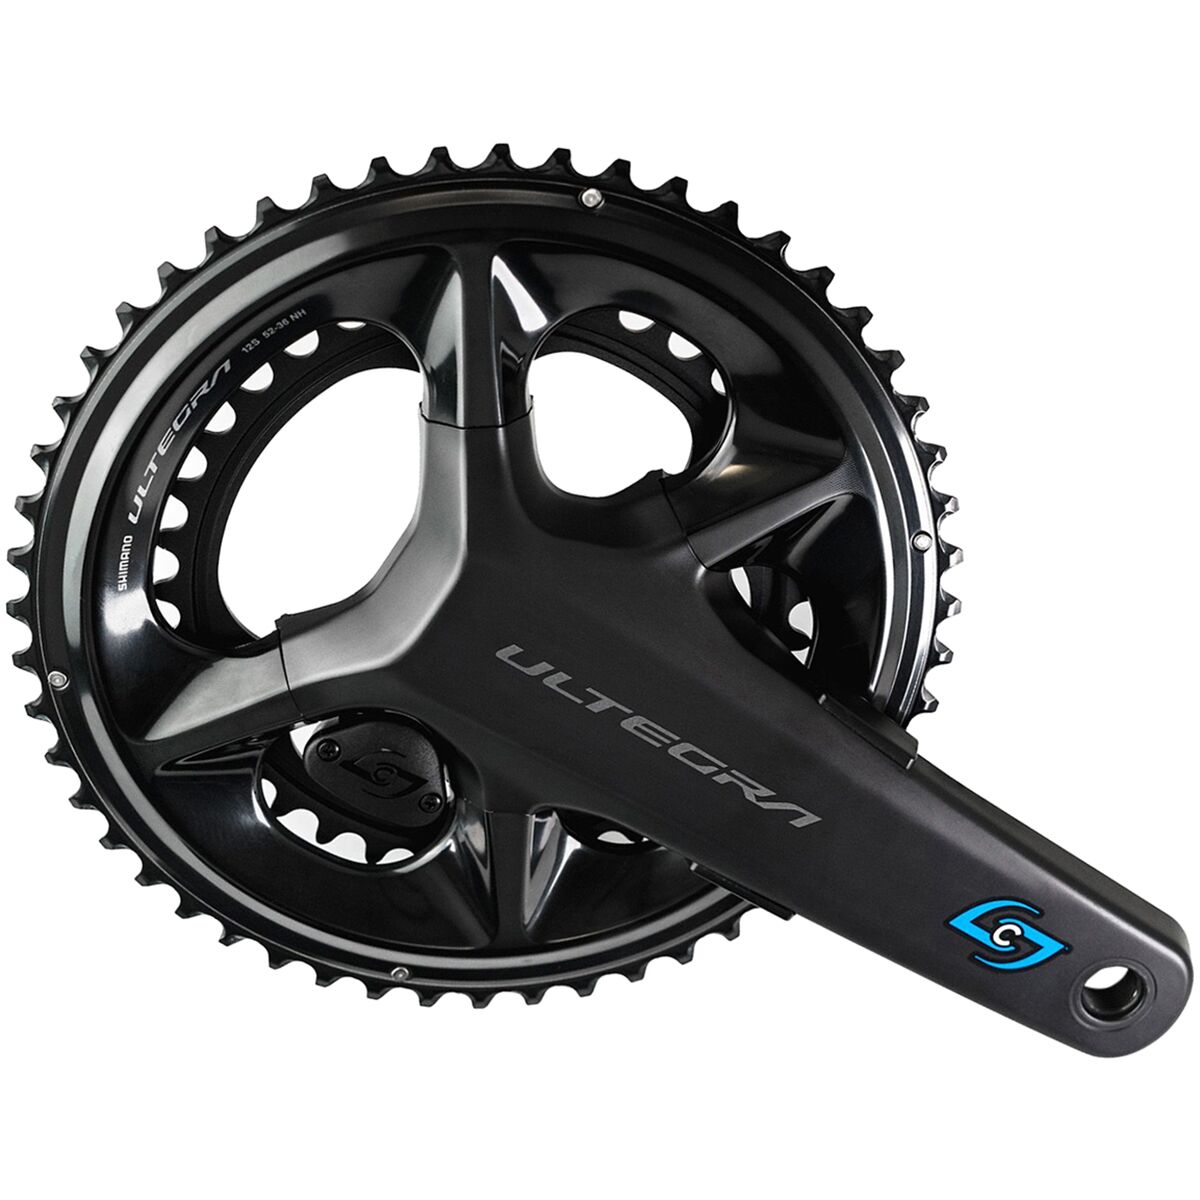 Stages Cycling Shimano Ultegra R8100 Gen 3 Dual-Sided Power Meter Crankset